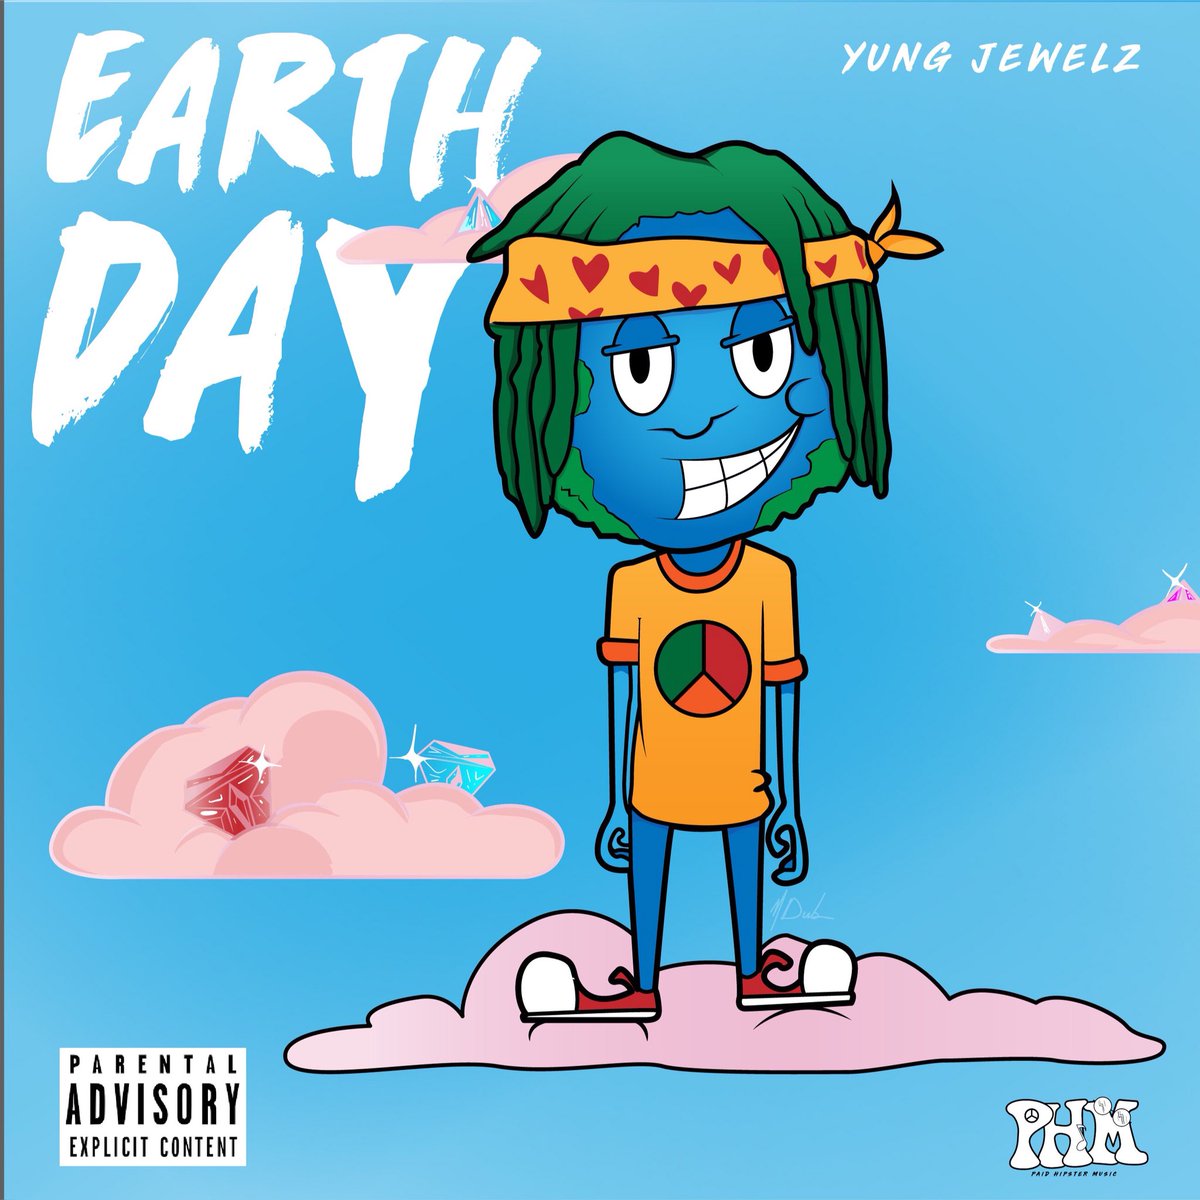 [New] Yung Jewelz “Earth Day” EP @thepaidhipster